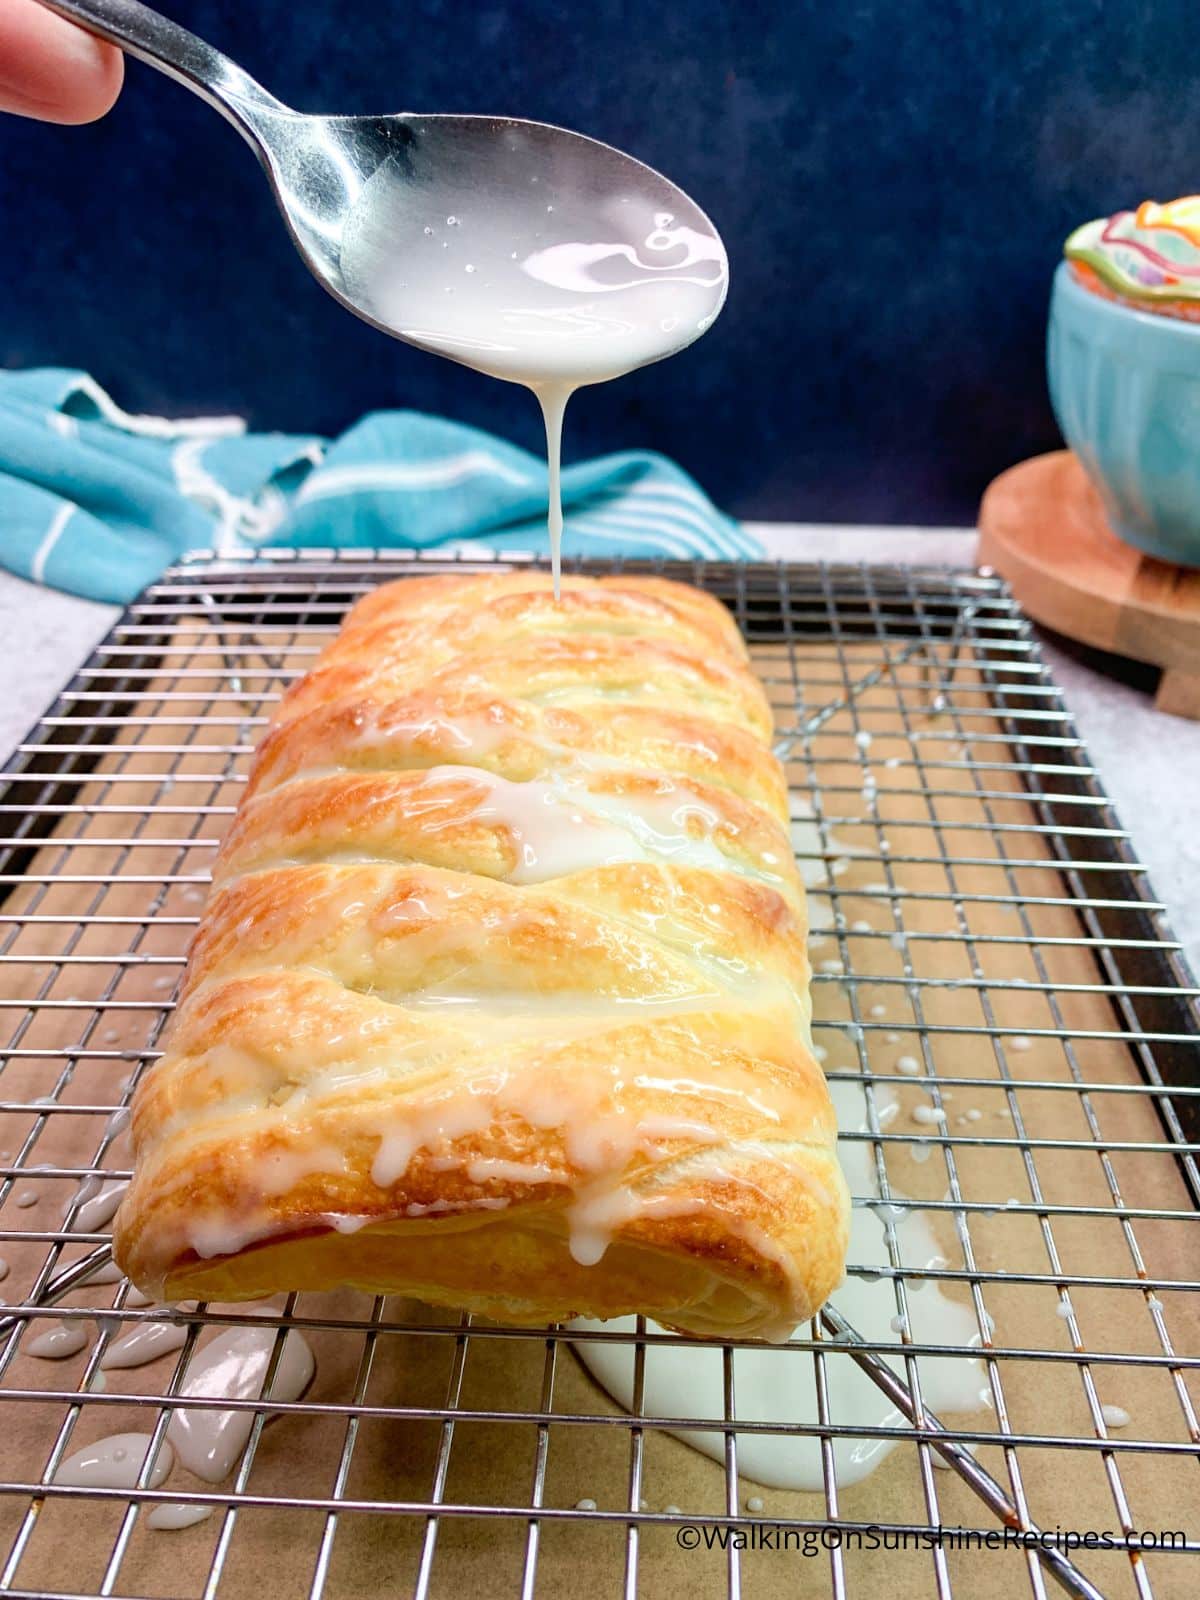 Use a spoon to drizzle the powdered sugar glaze on top of puff pastry danish.